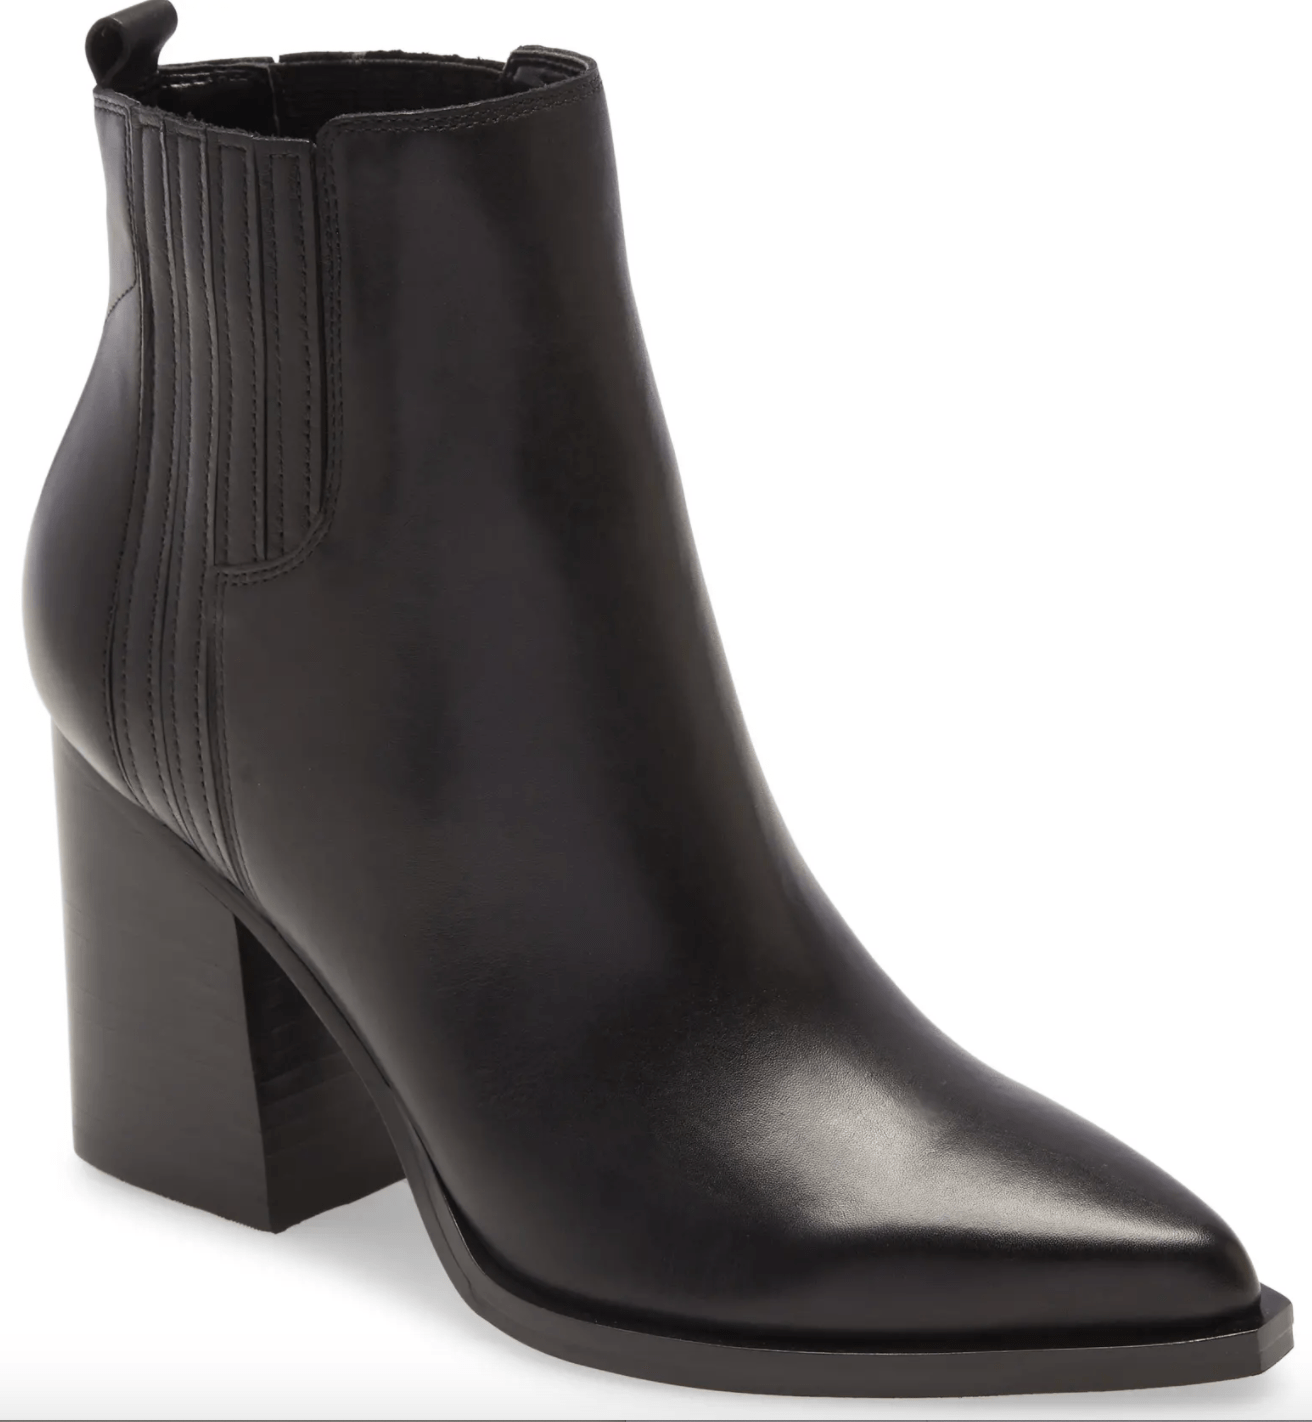 marc fisher pointed toe balck bootie